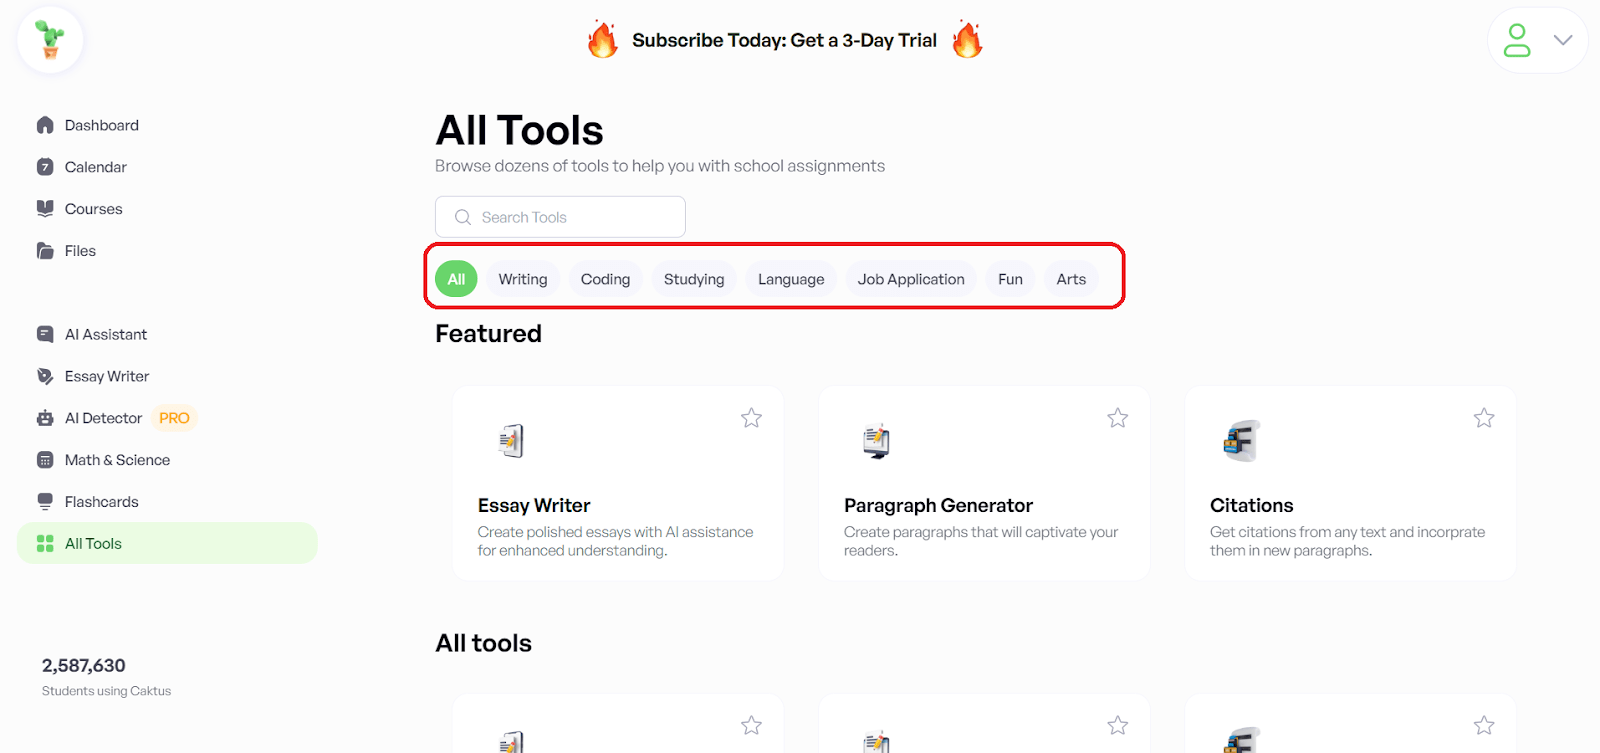 Return to the dashboard and click All Tools